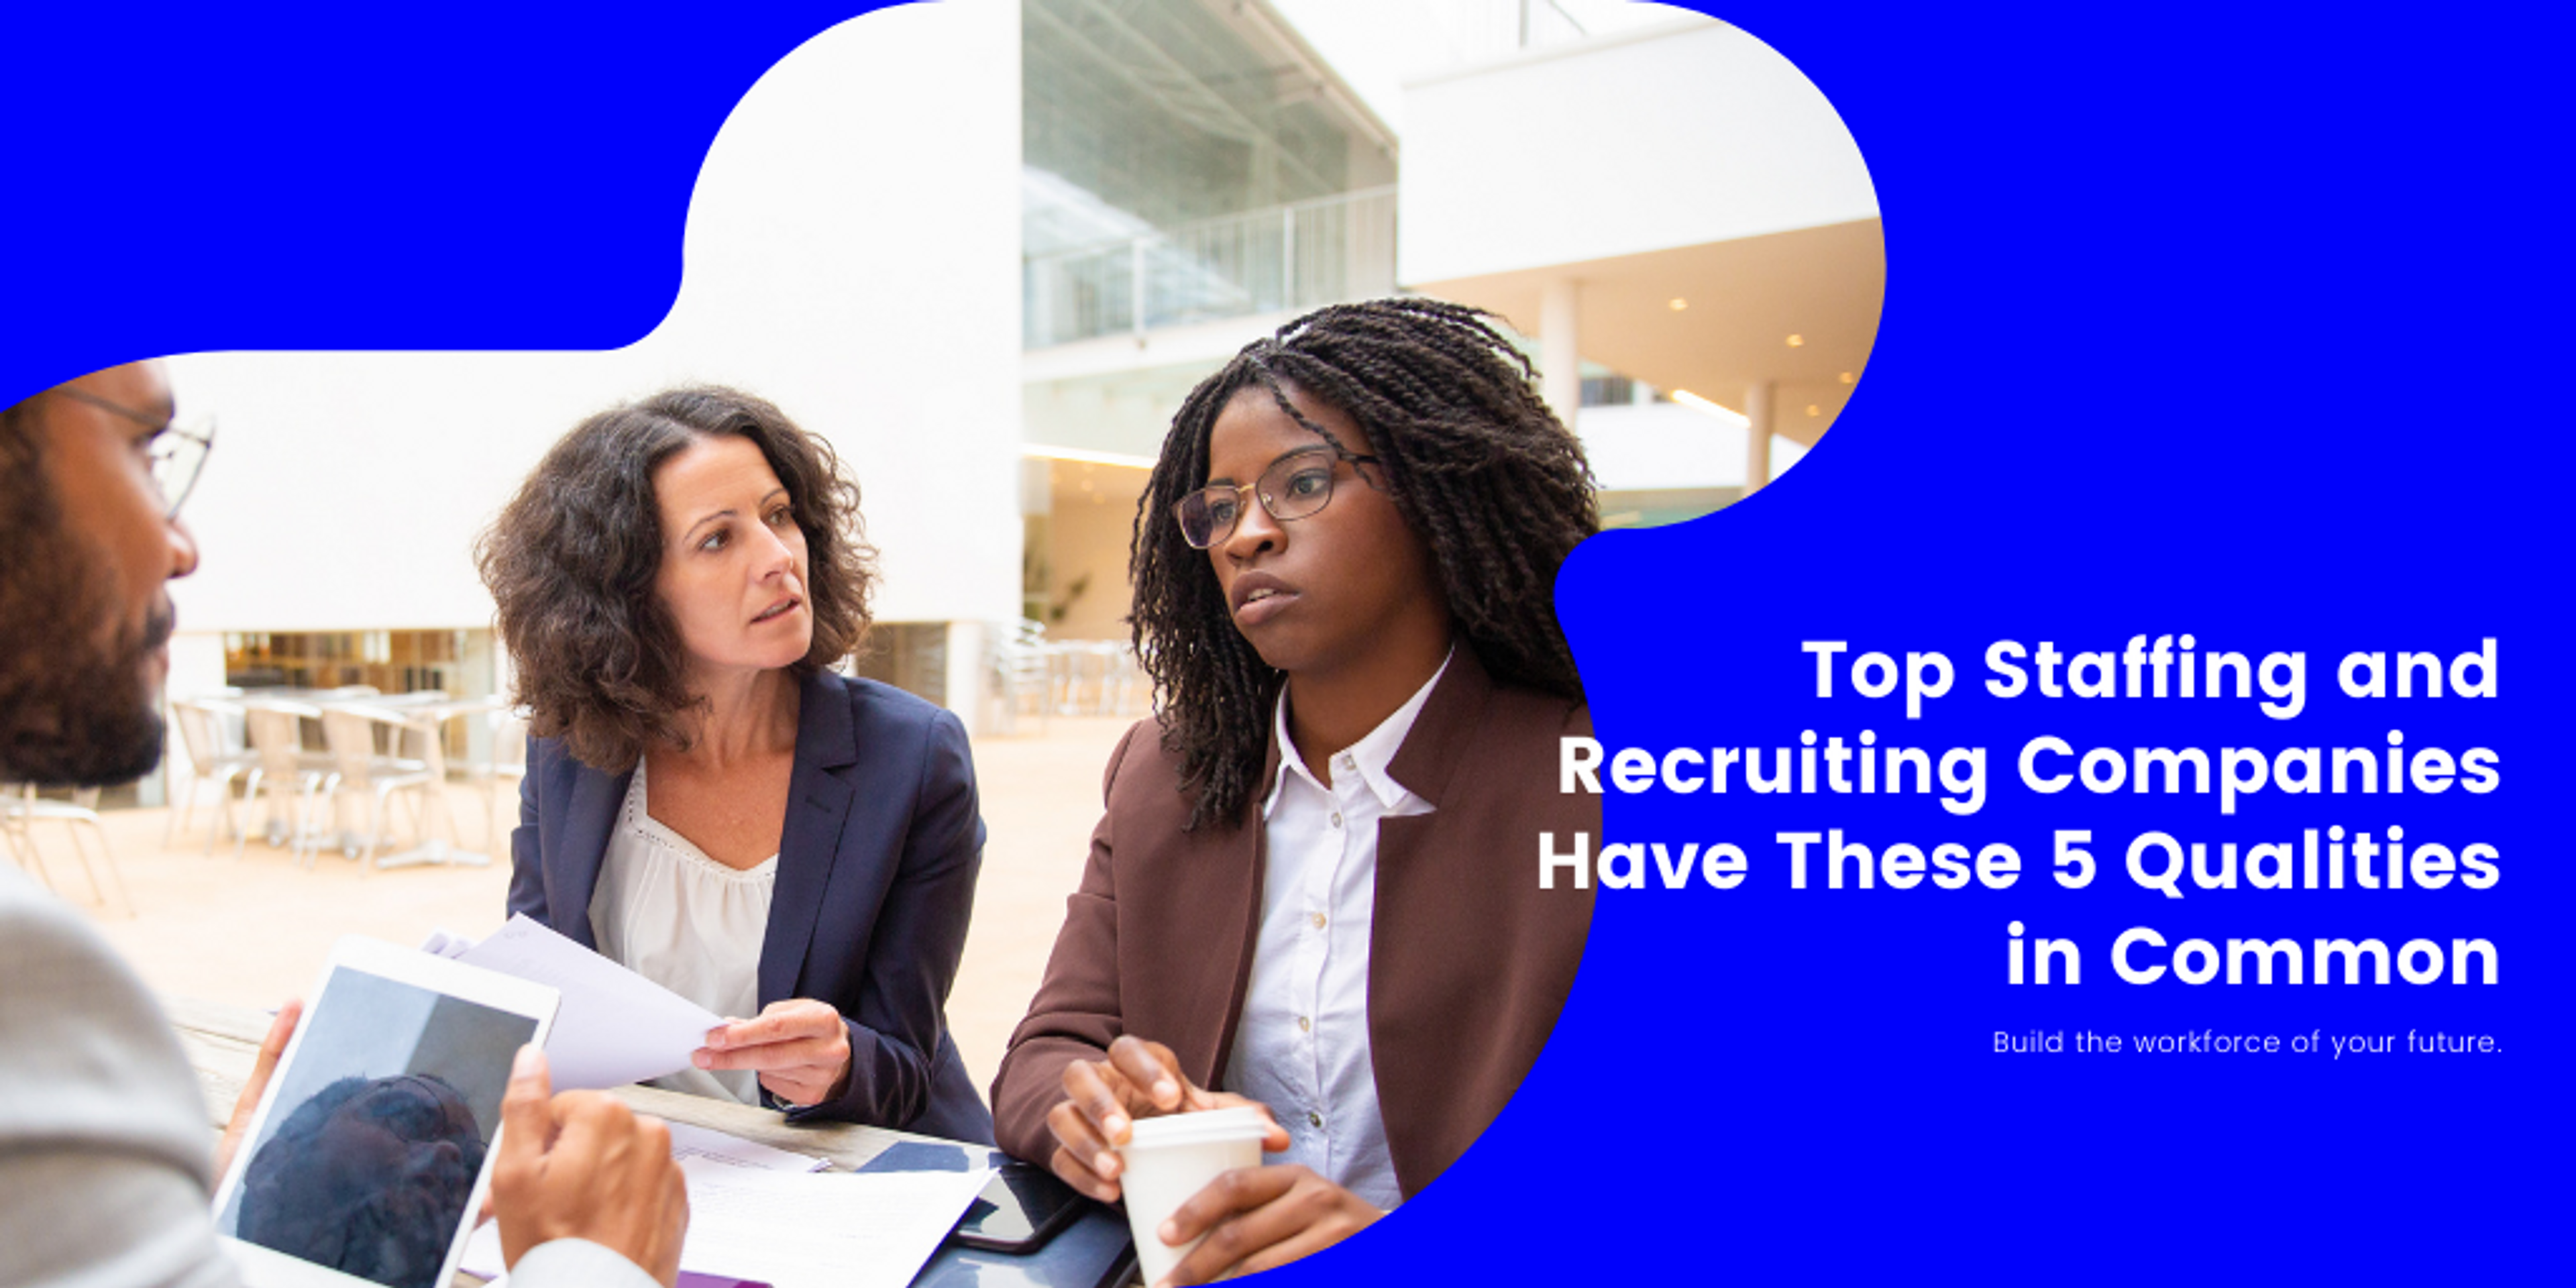 Image of people talking at a desk with text that reads "Top Staffing and Recruiting Companies Have These 5 Qualities in Common"